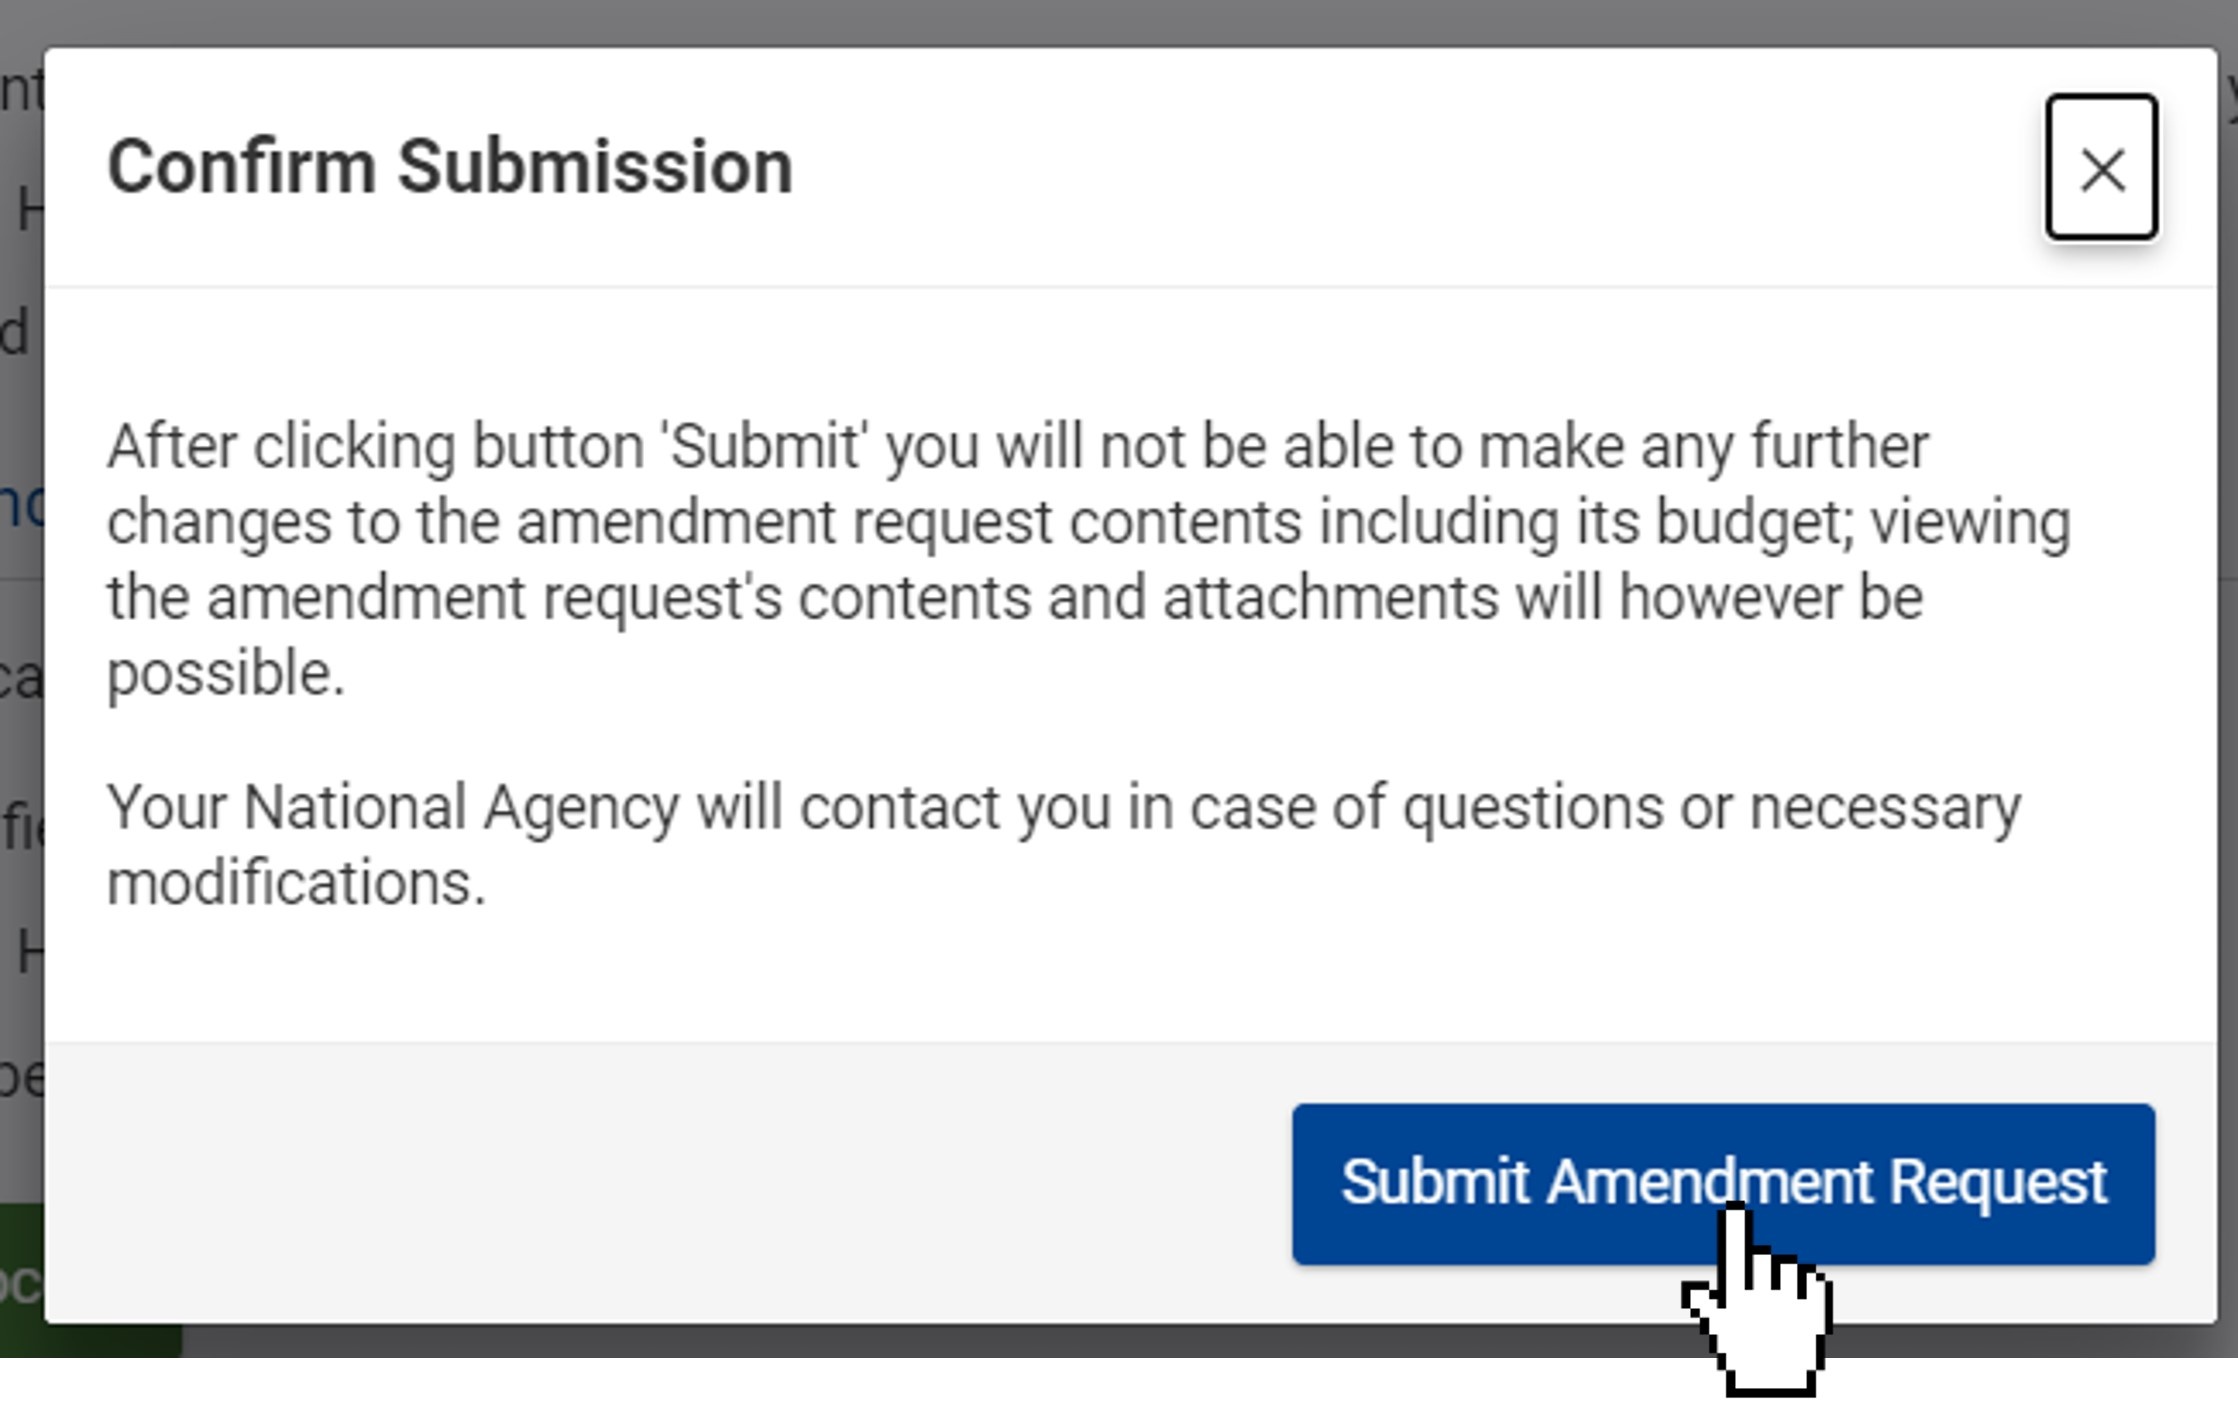 Confirm the submission of the amendment request